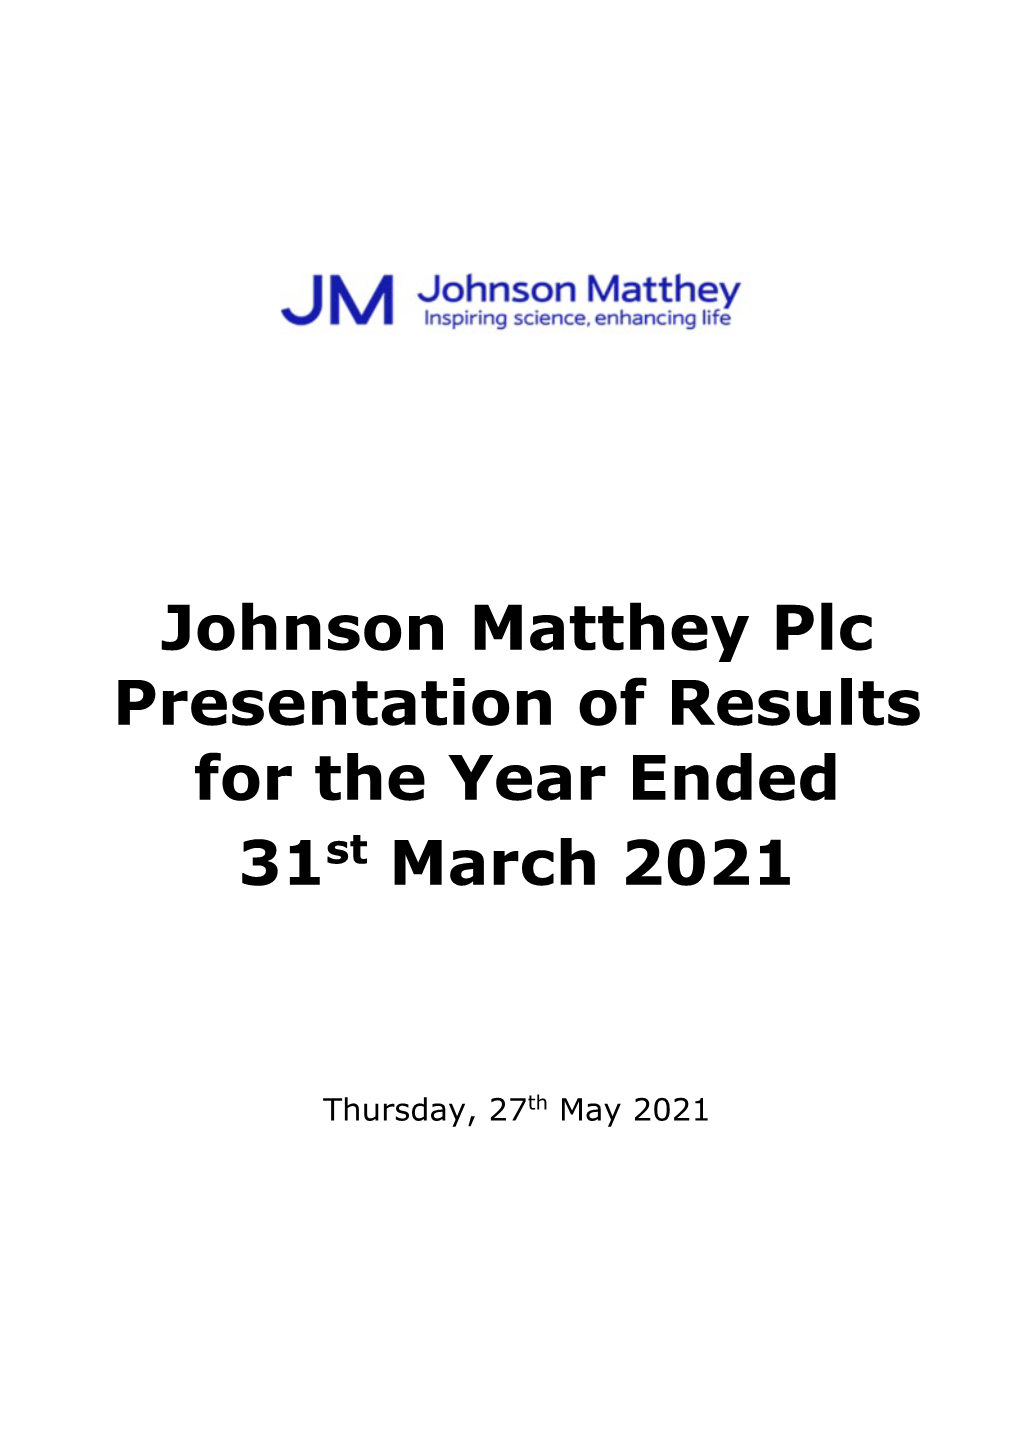 Johnson Matthey Plc Presentation of Results for the Year Ended 31St March 2021